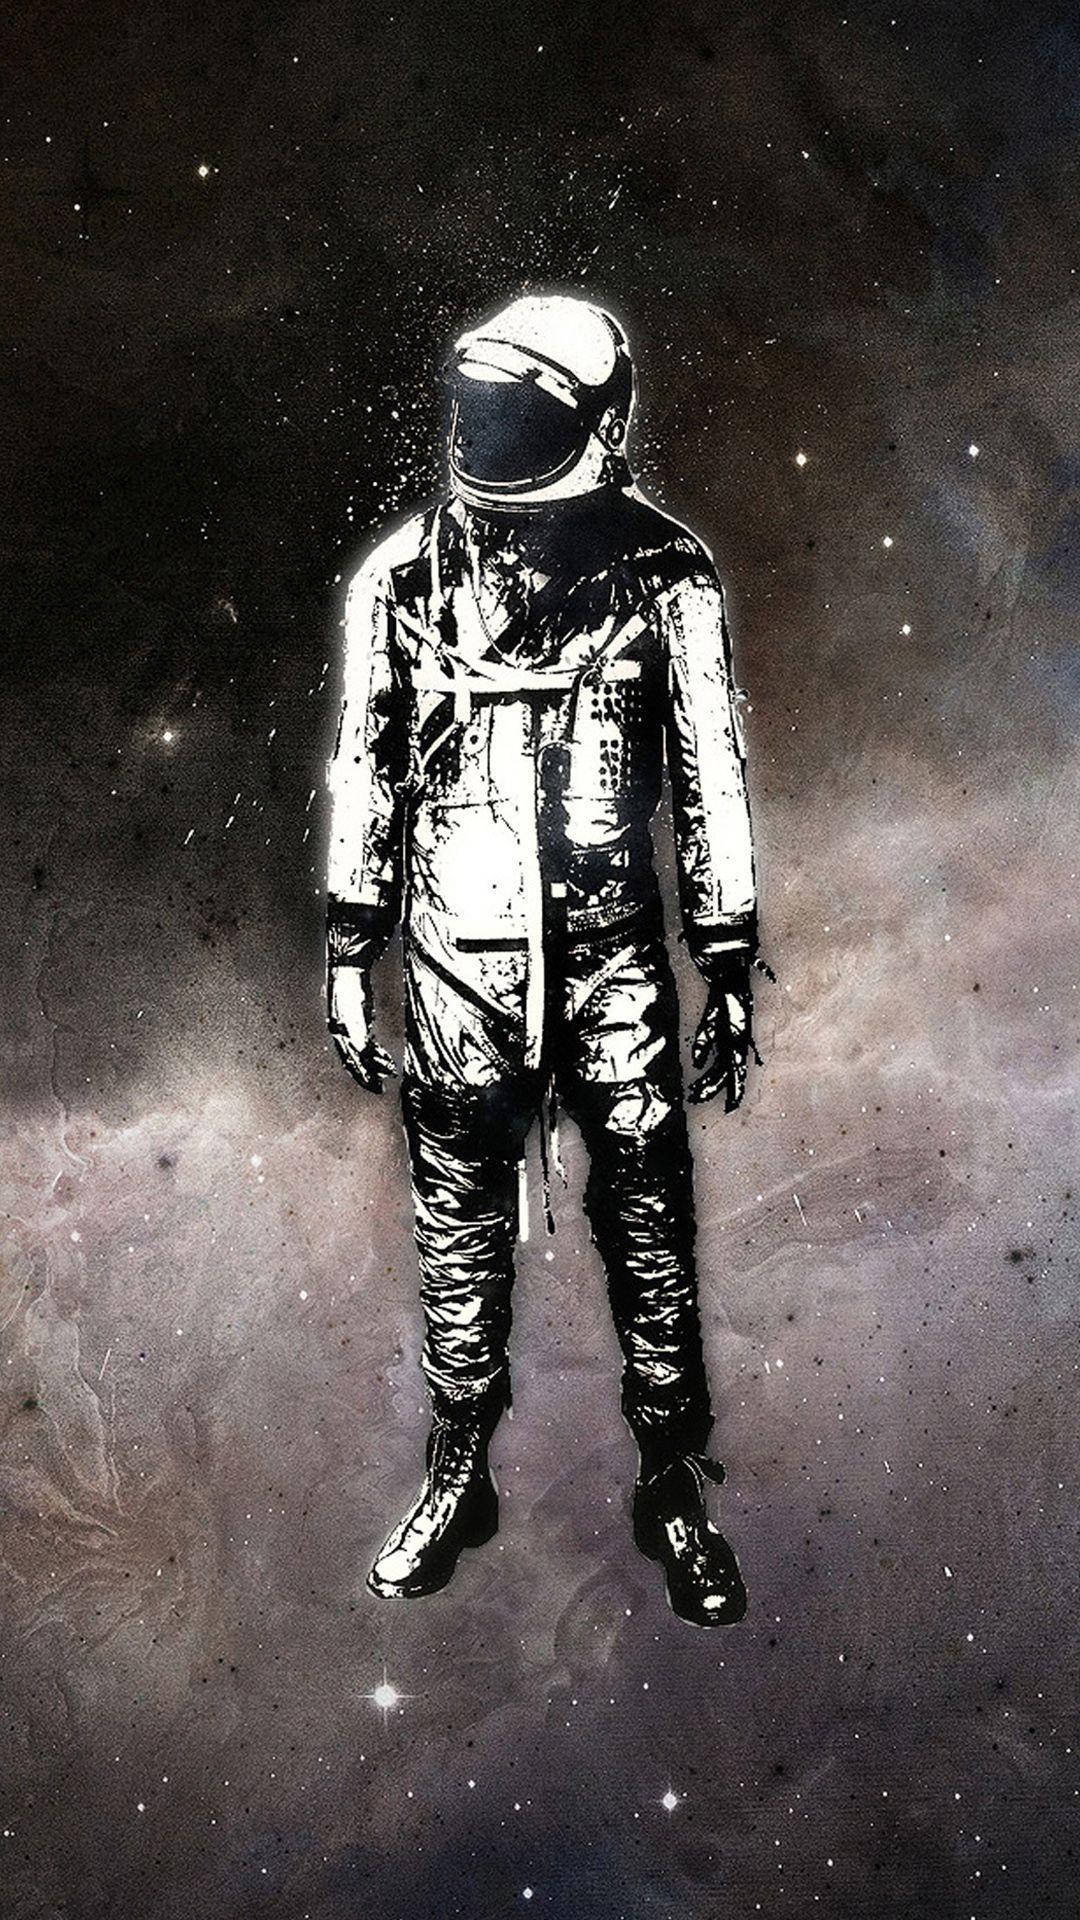 Thrilling Image Of Spaceman Background